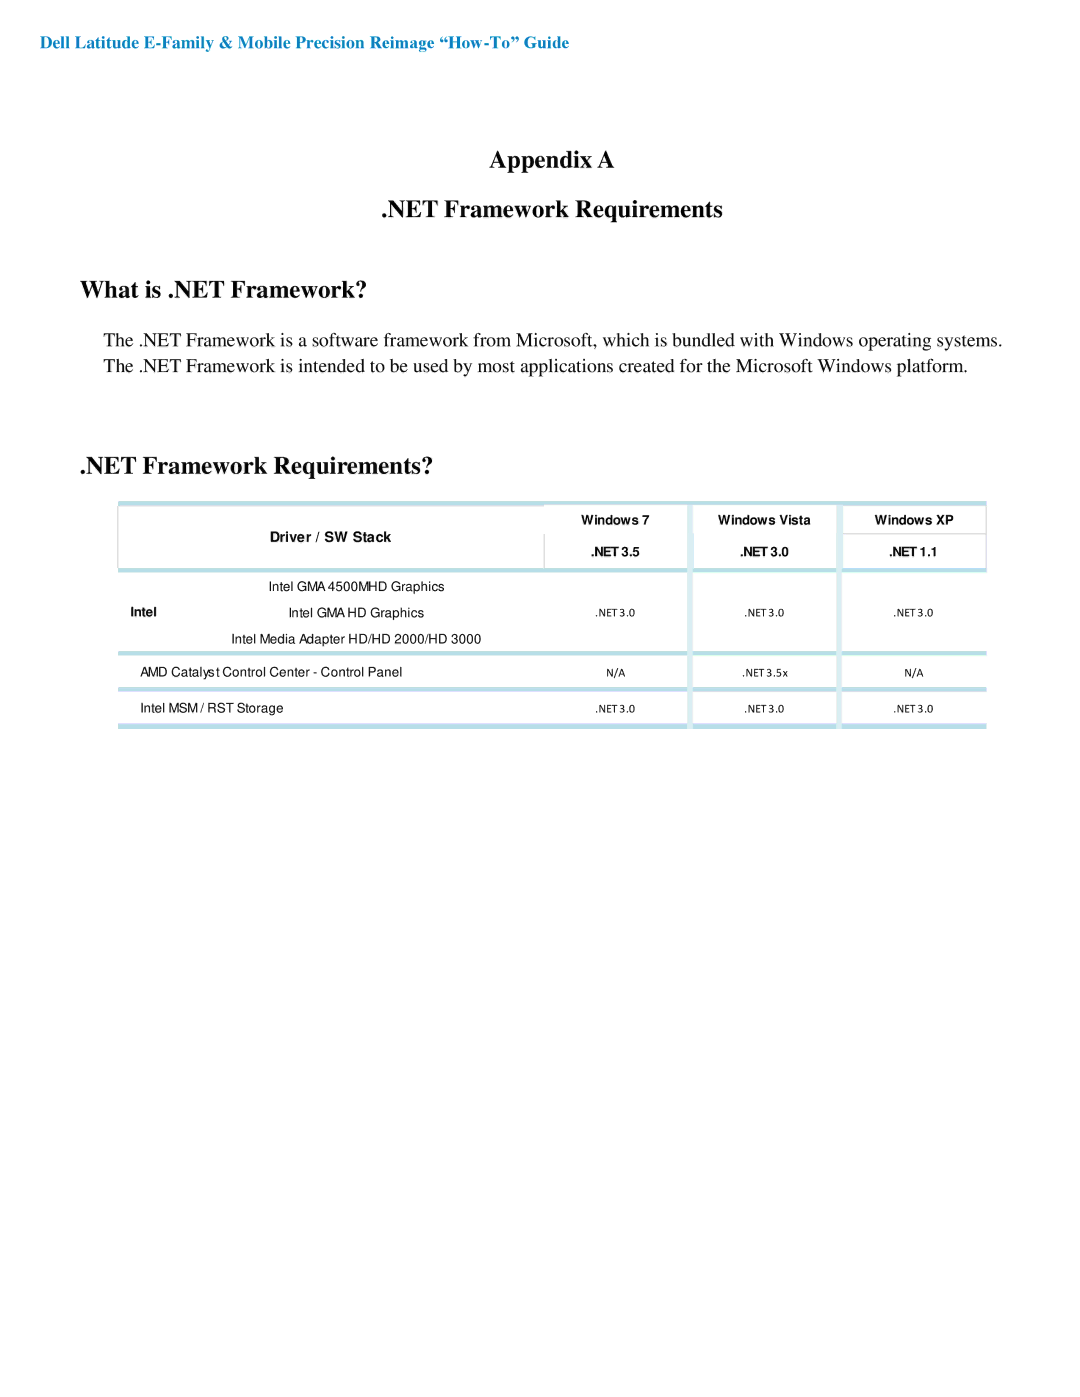 Dell A03 manual NET Framework Requirements?, Driver / SW Stack 